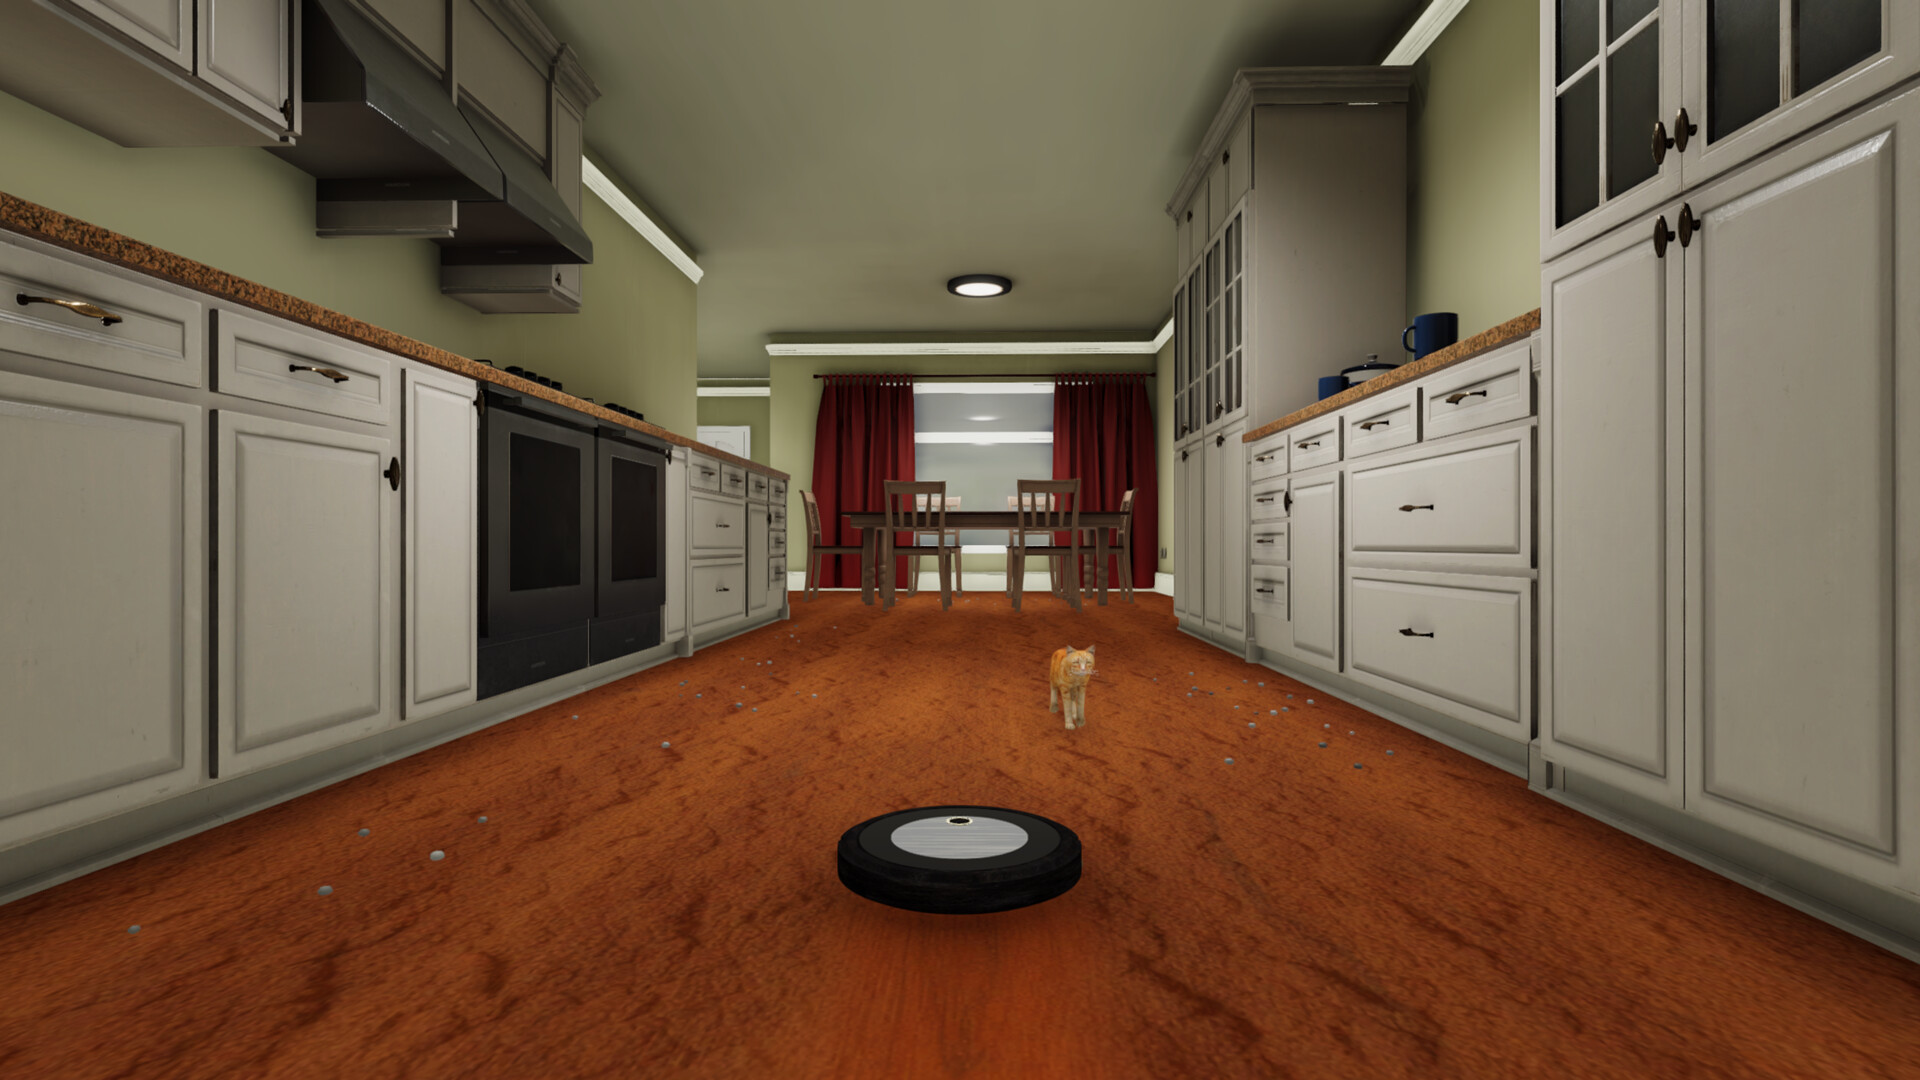 Save 25% on Robot Room Cleaner on Steam